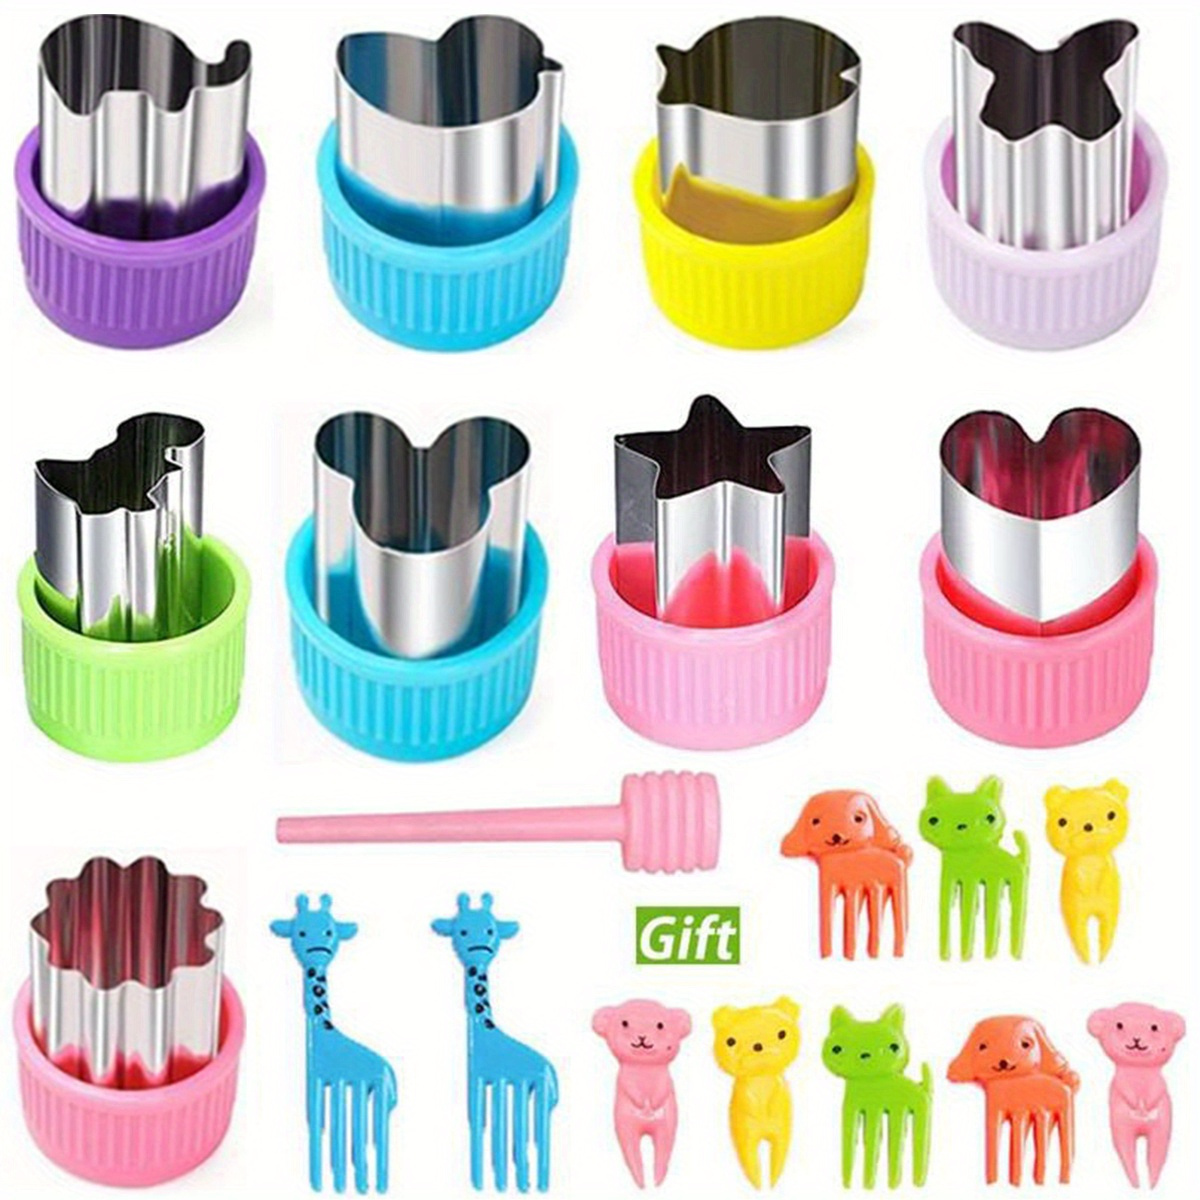 

20-piece Fruit & Vegetable Slicer Set With Animal Shapes And Reusable Mini Sandwich Molds - Perfect For Bento Boxes, Metal Kitchen Gadgets